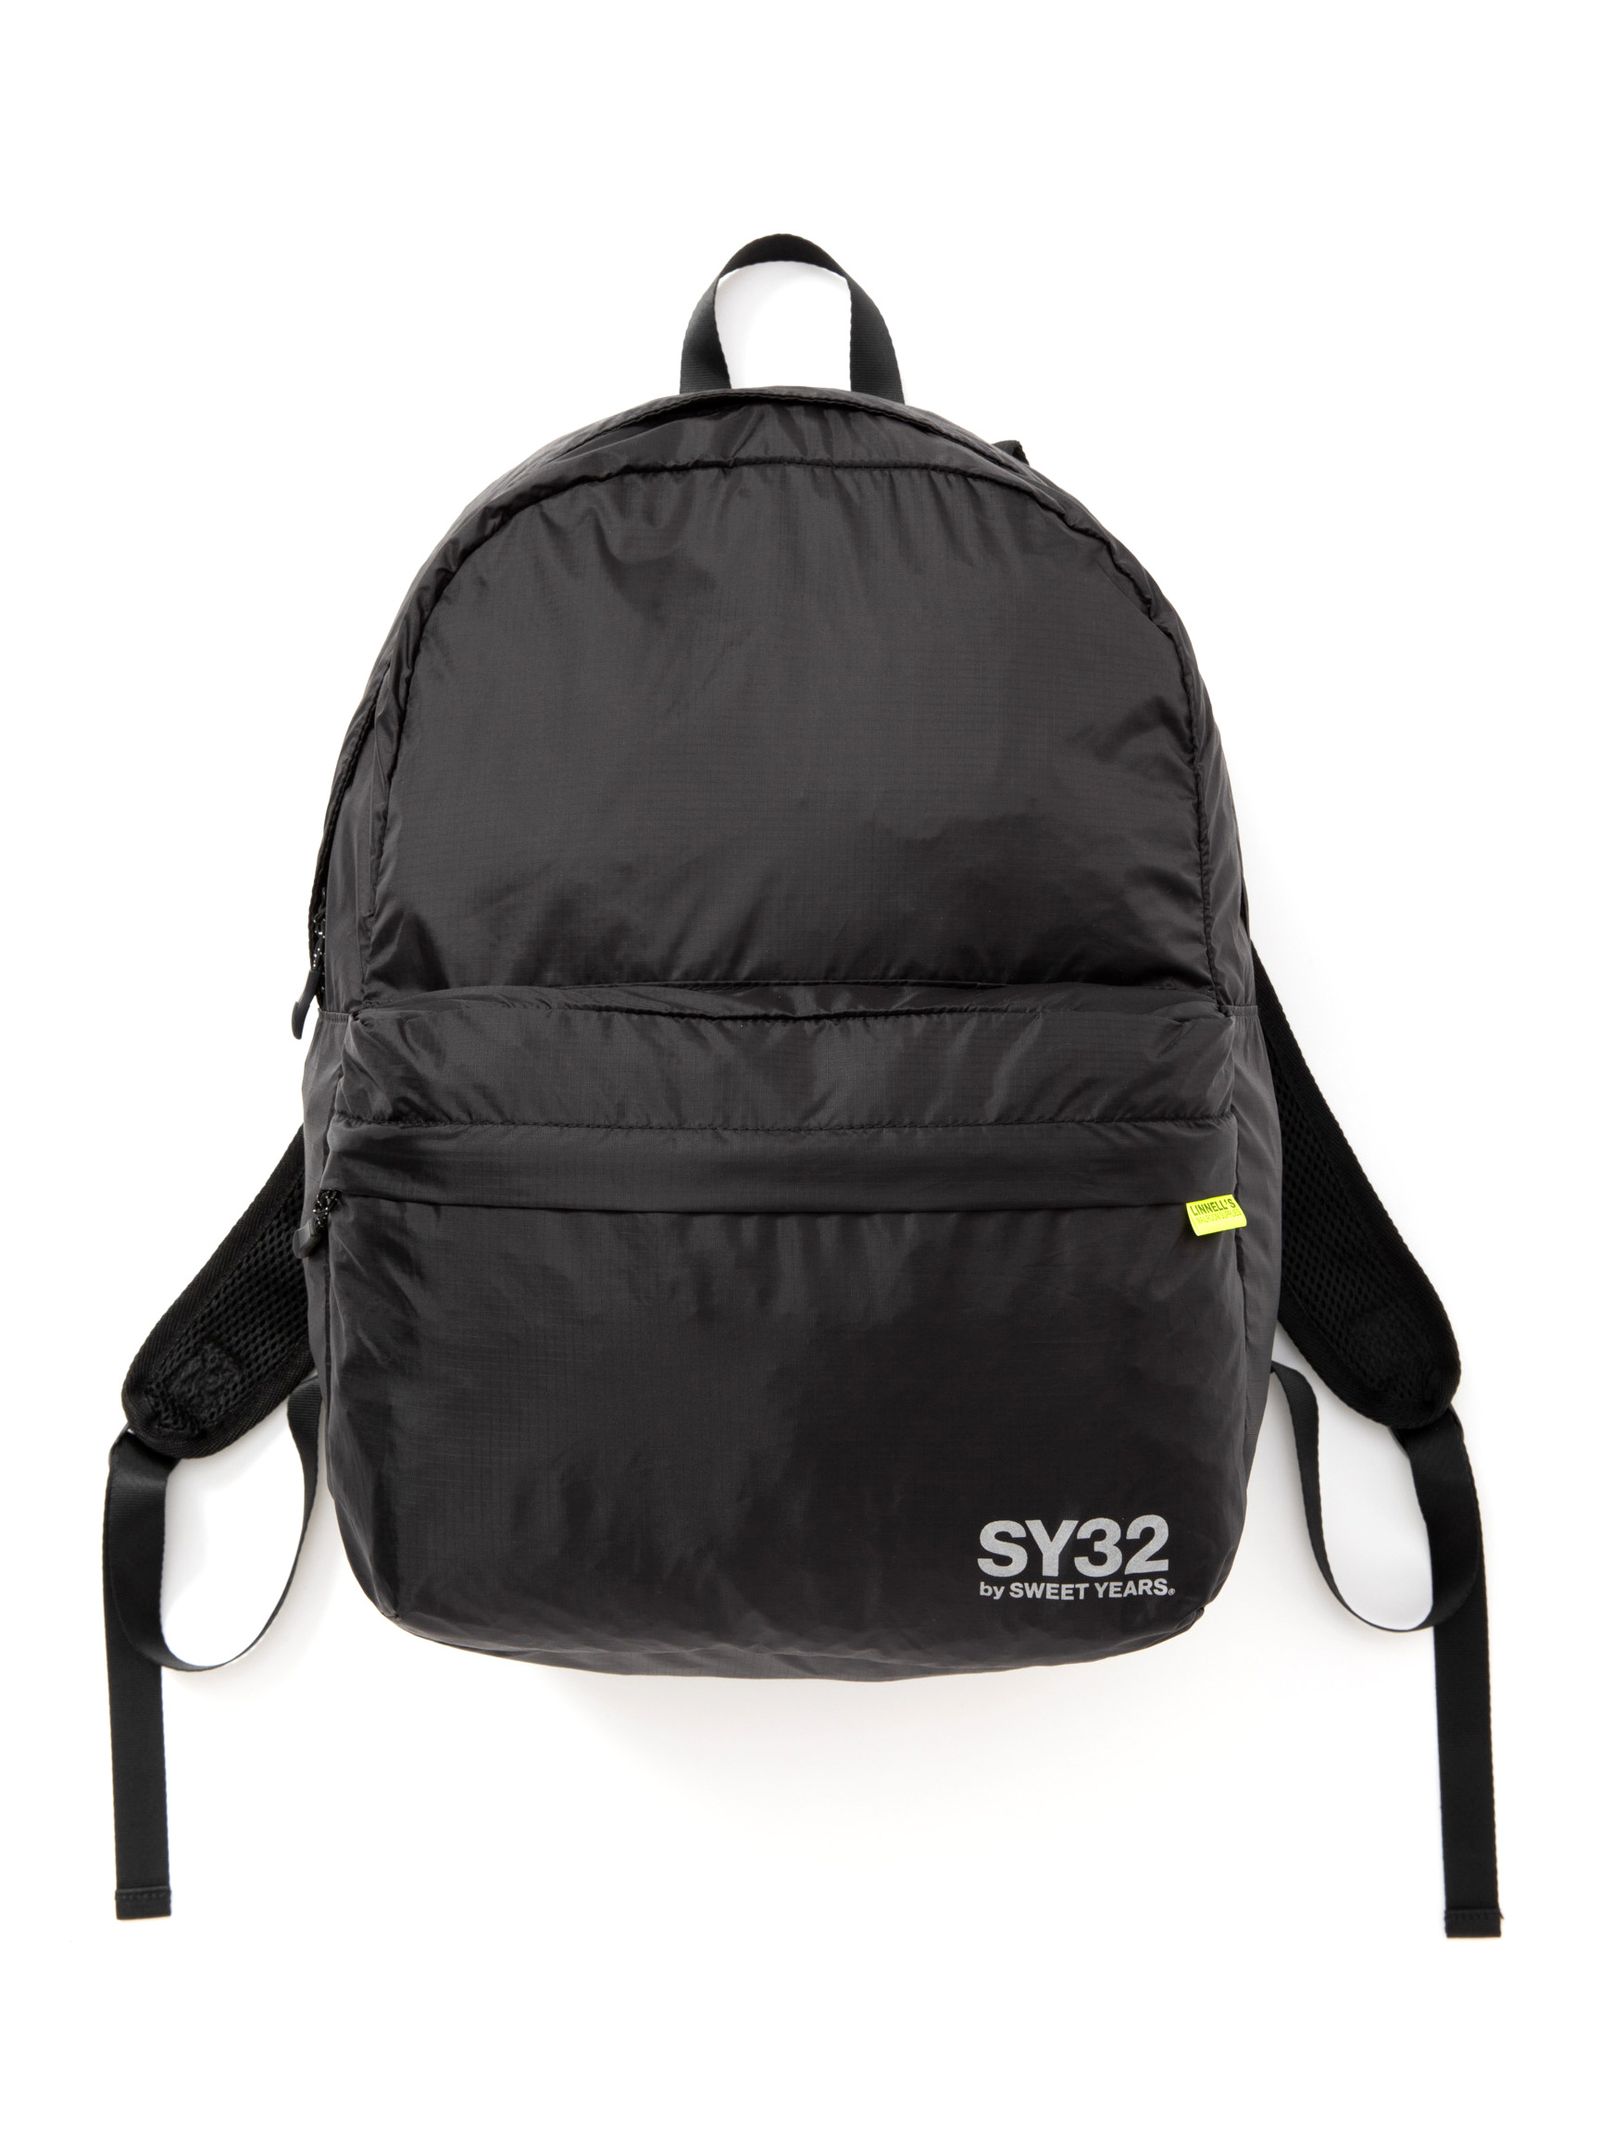 SY32 by SWEET YEARS - SY32 PACKABLE ECO BACKPACK ...